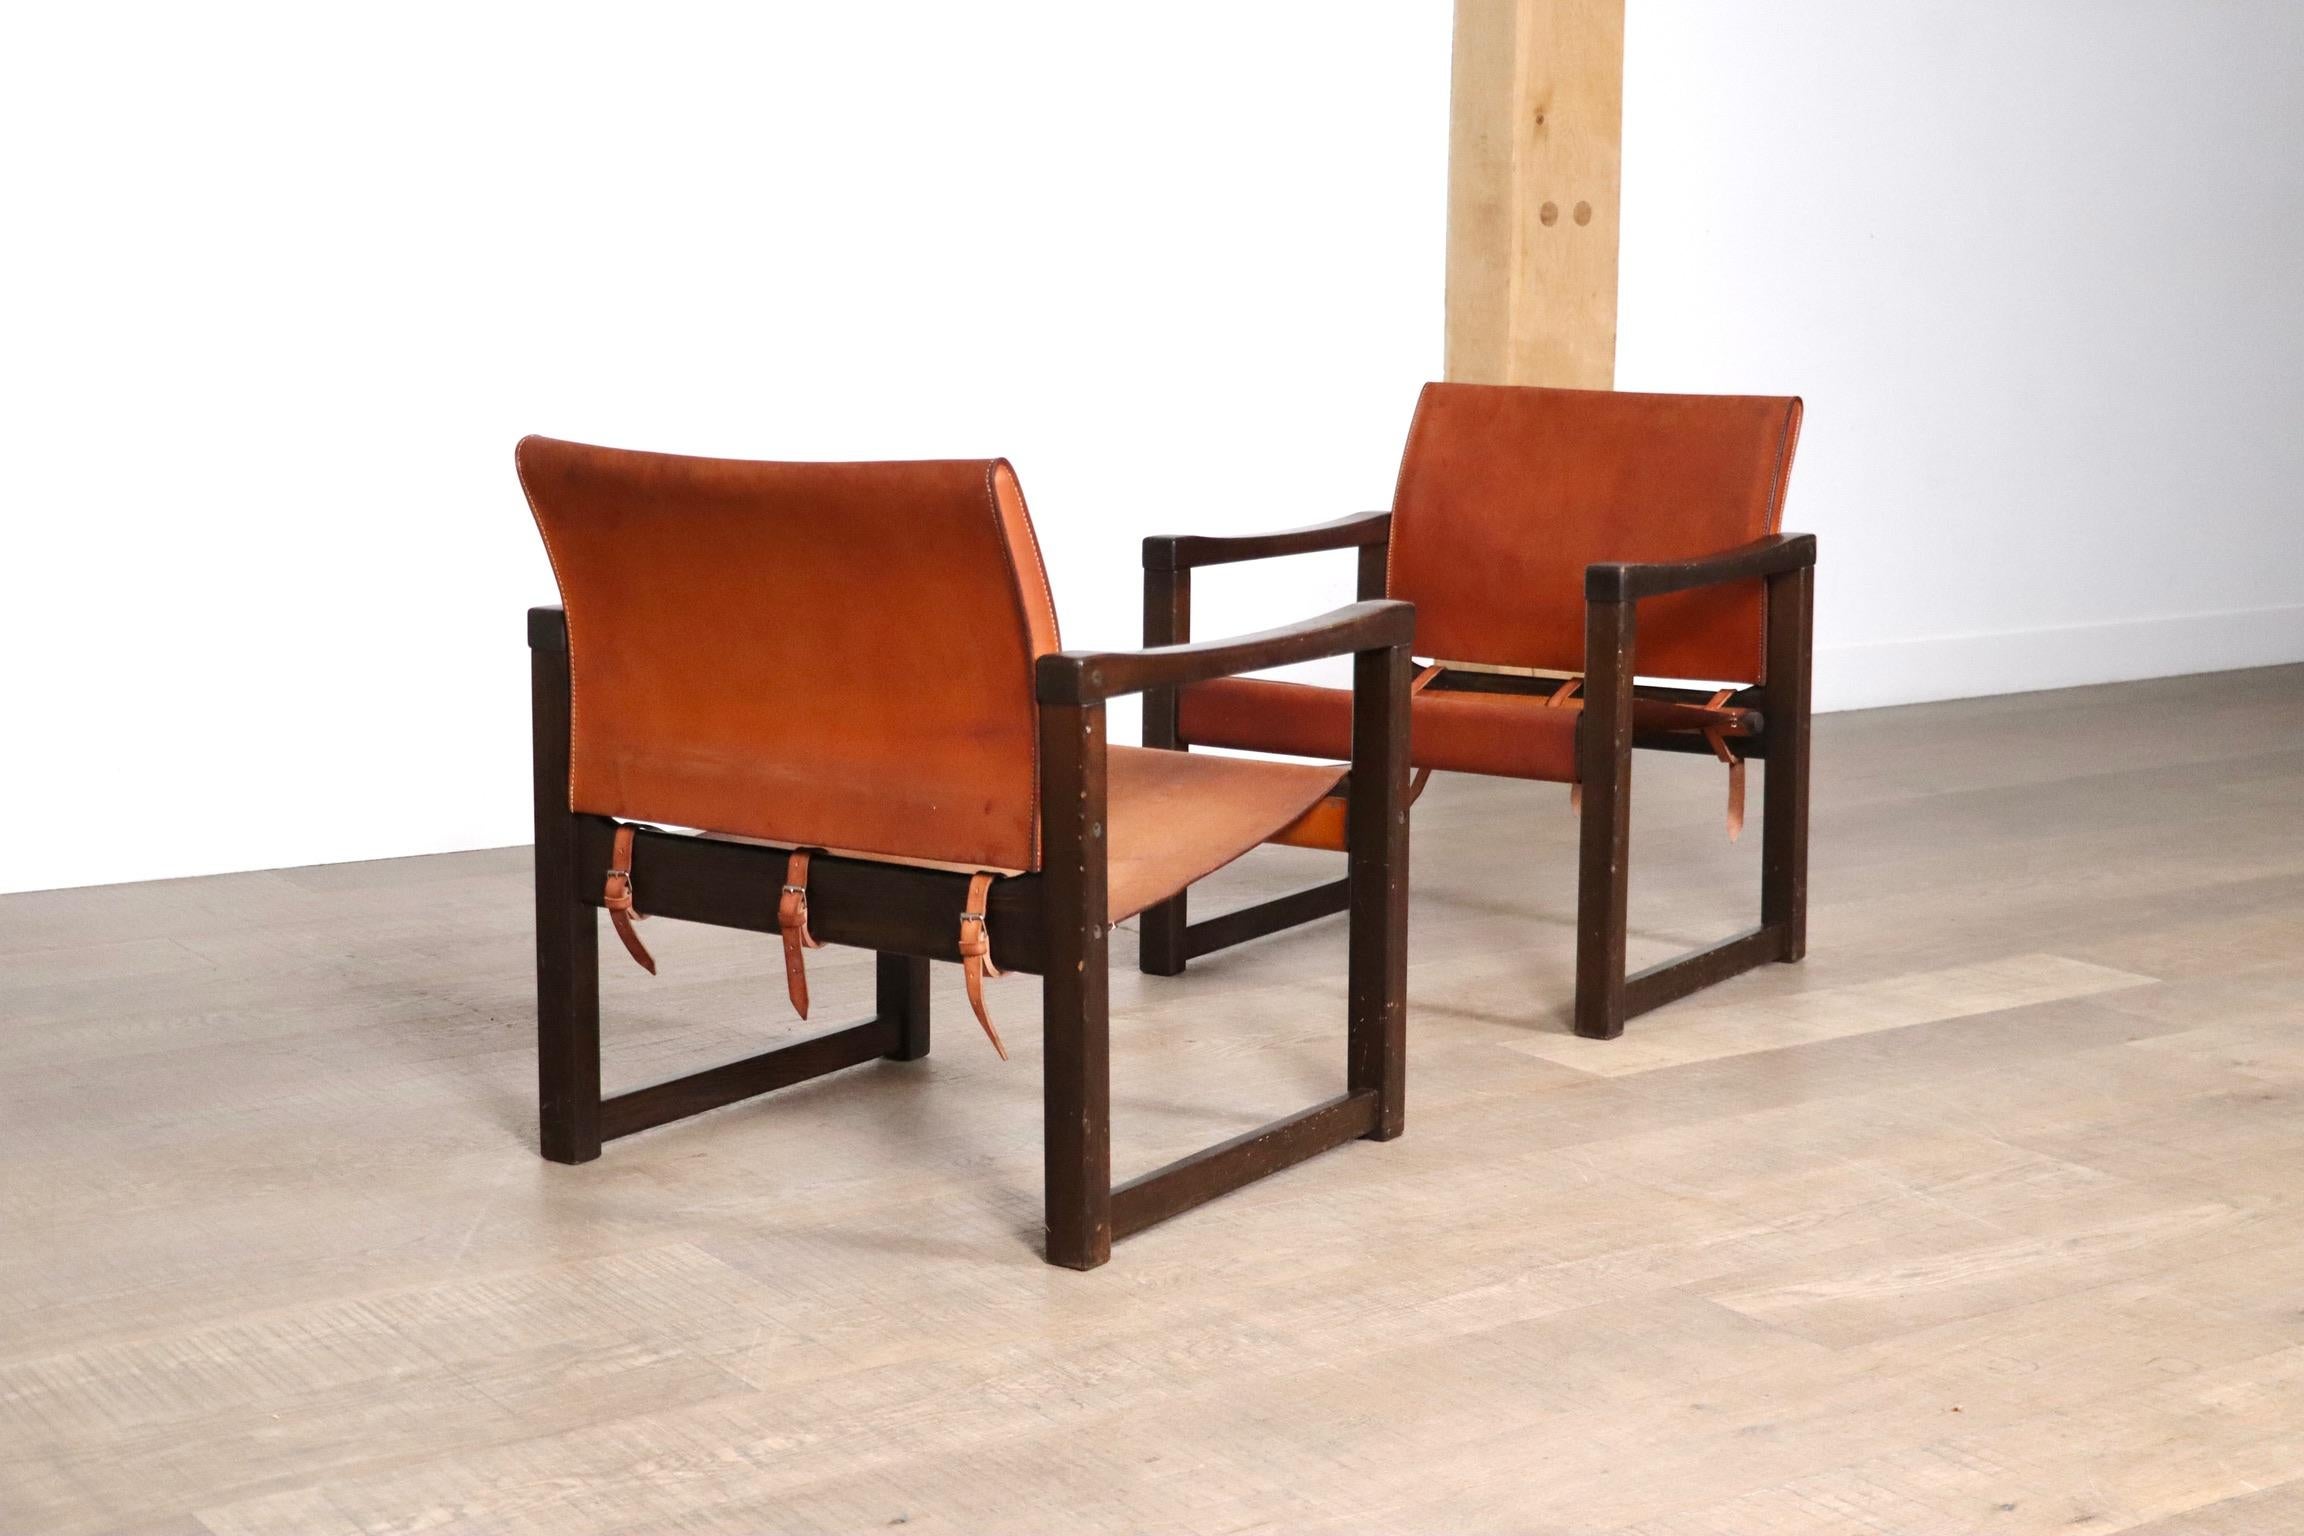 Pair Of Diana Safari Chairs By Karin Mobring In Cognac Leather For Ikea, 1970s 4